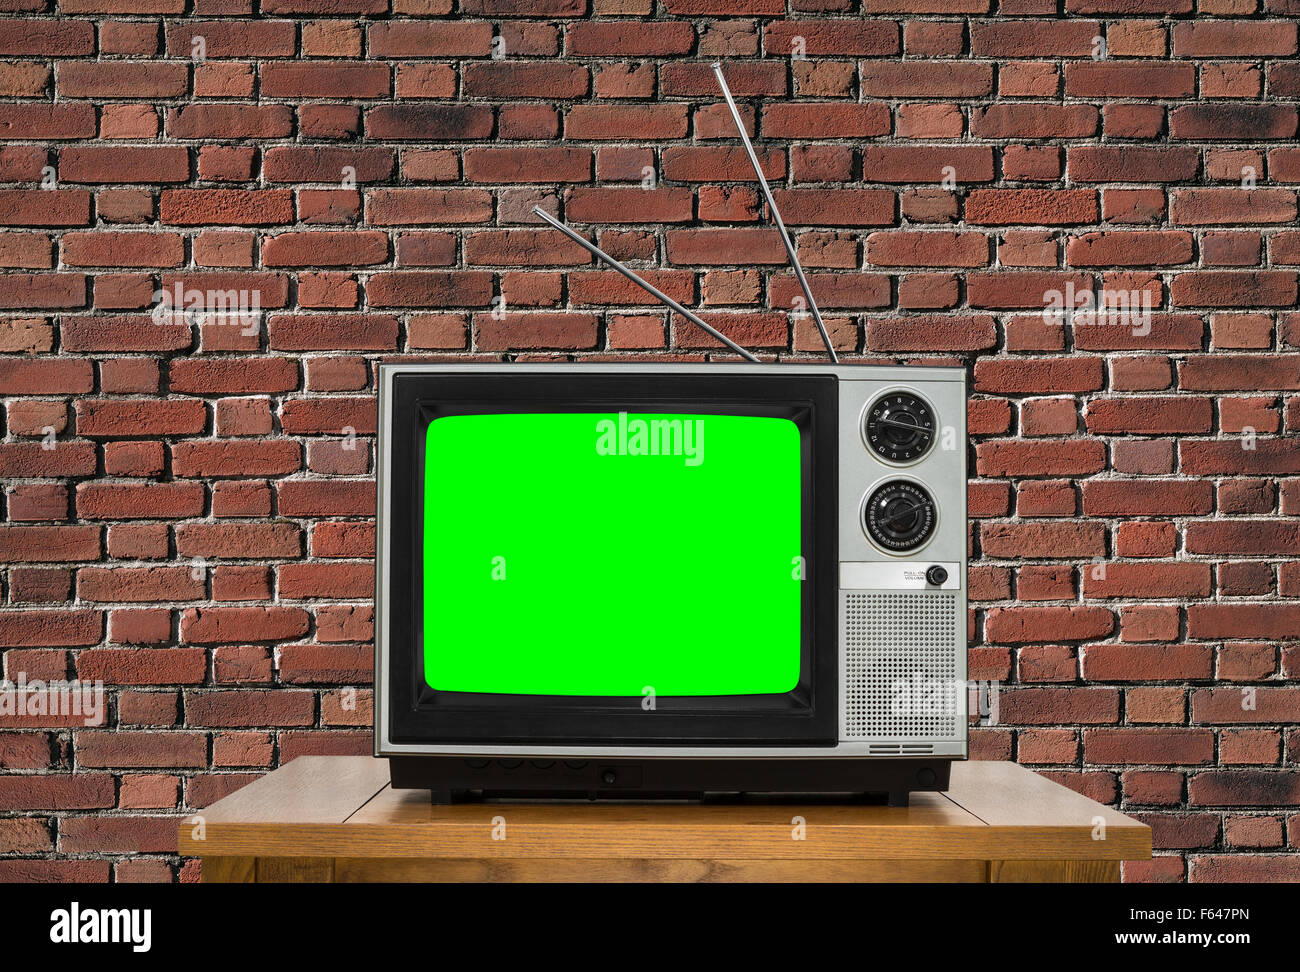 Old analogue television with chroma key green screen and brick wall. Stock Photo